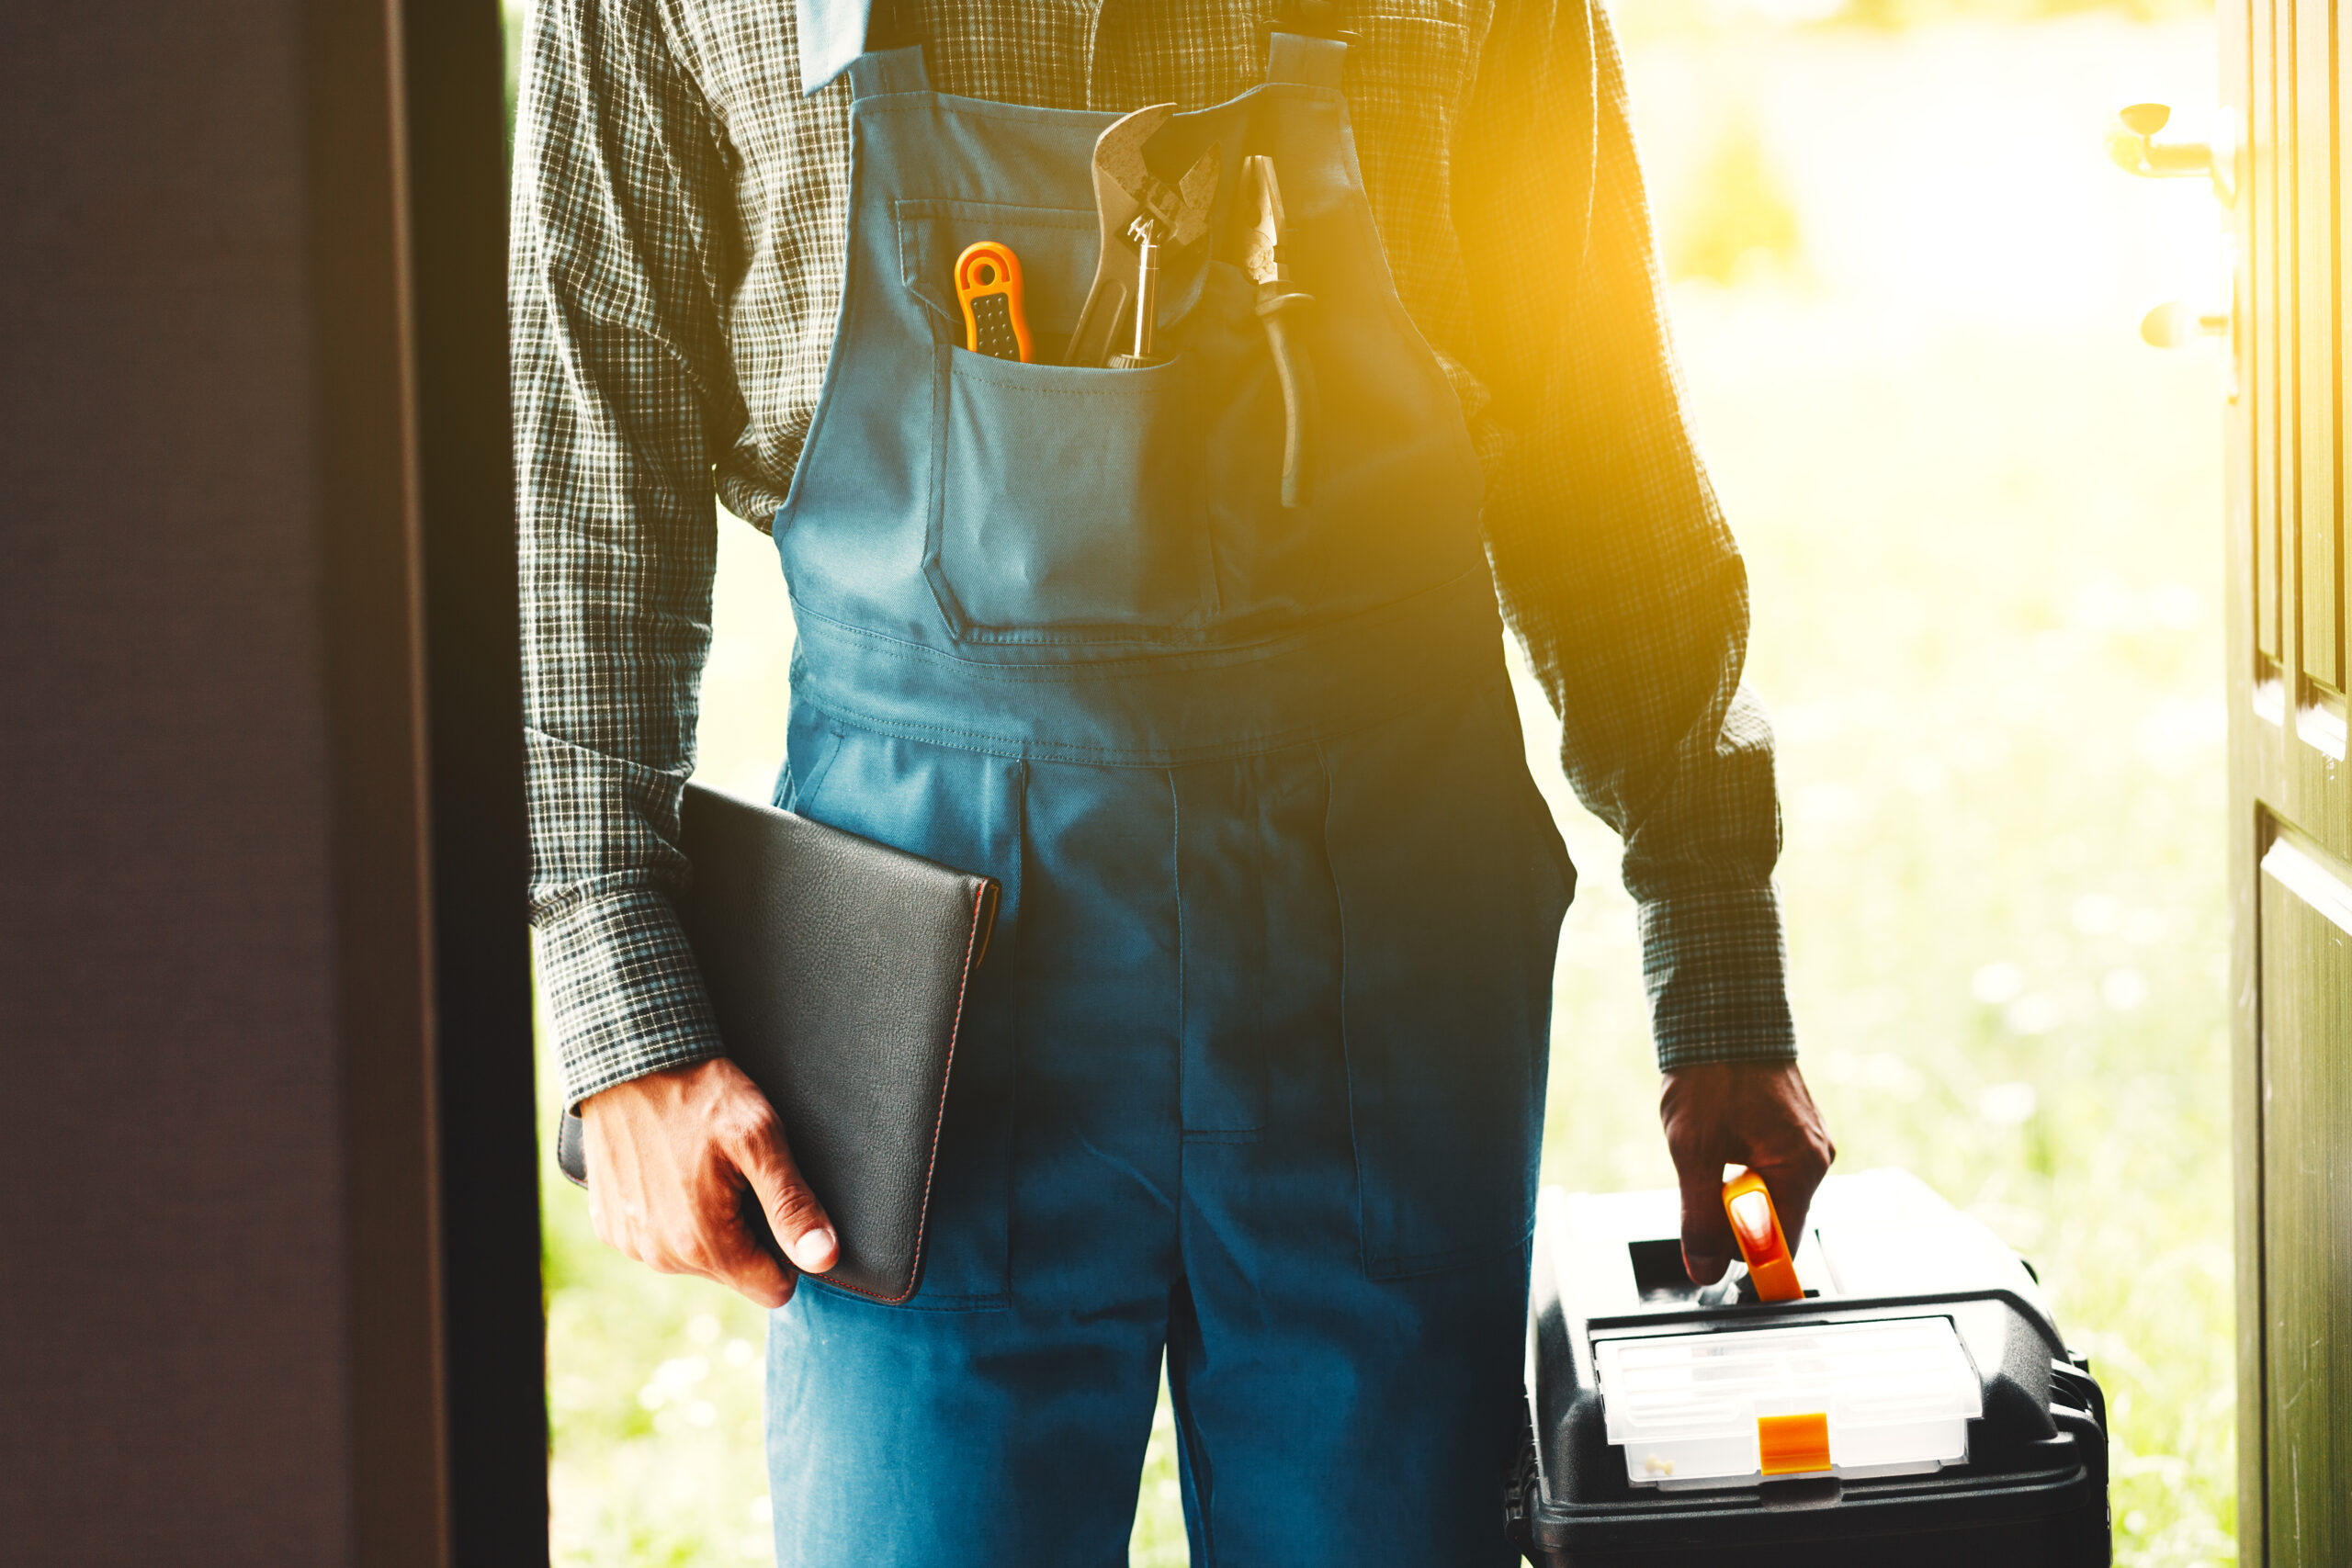 A plumber wearing overalls holding tools